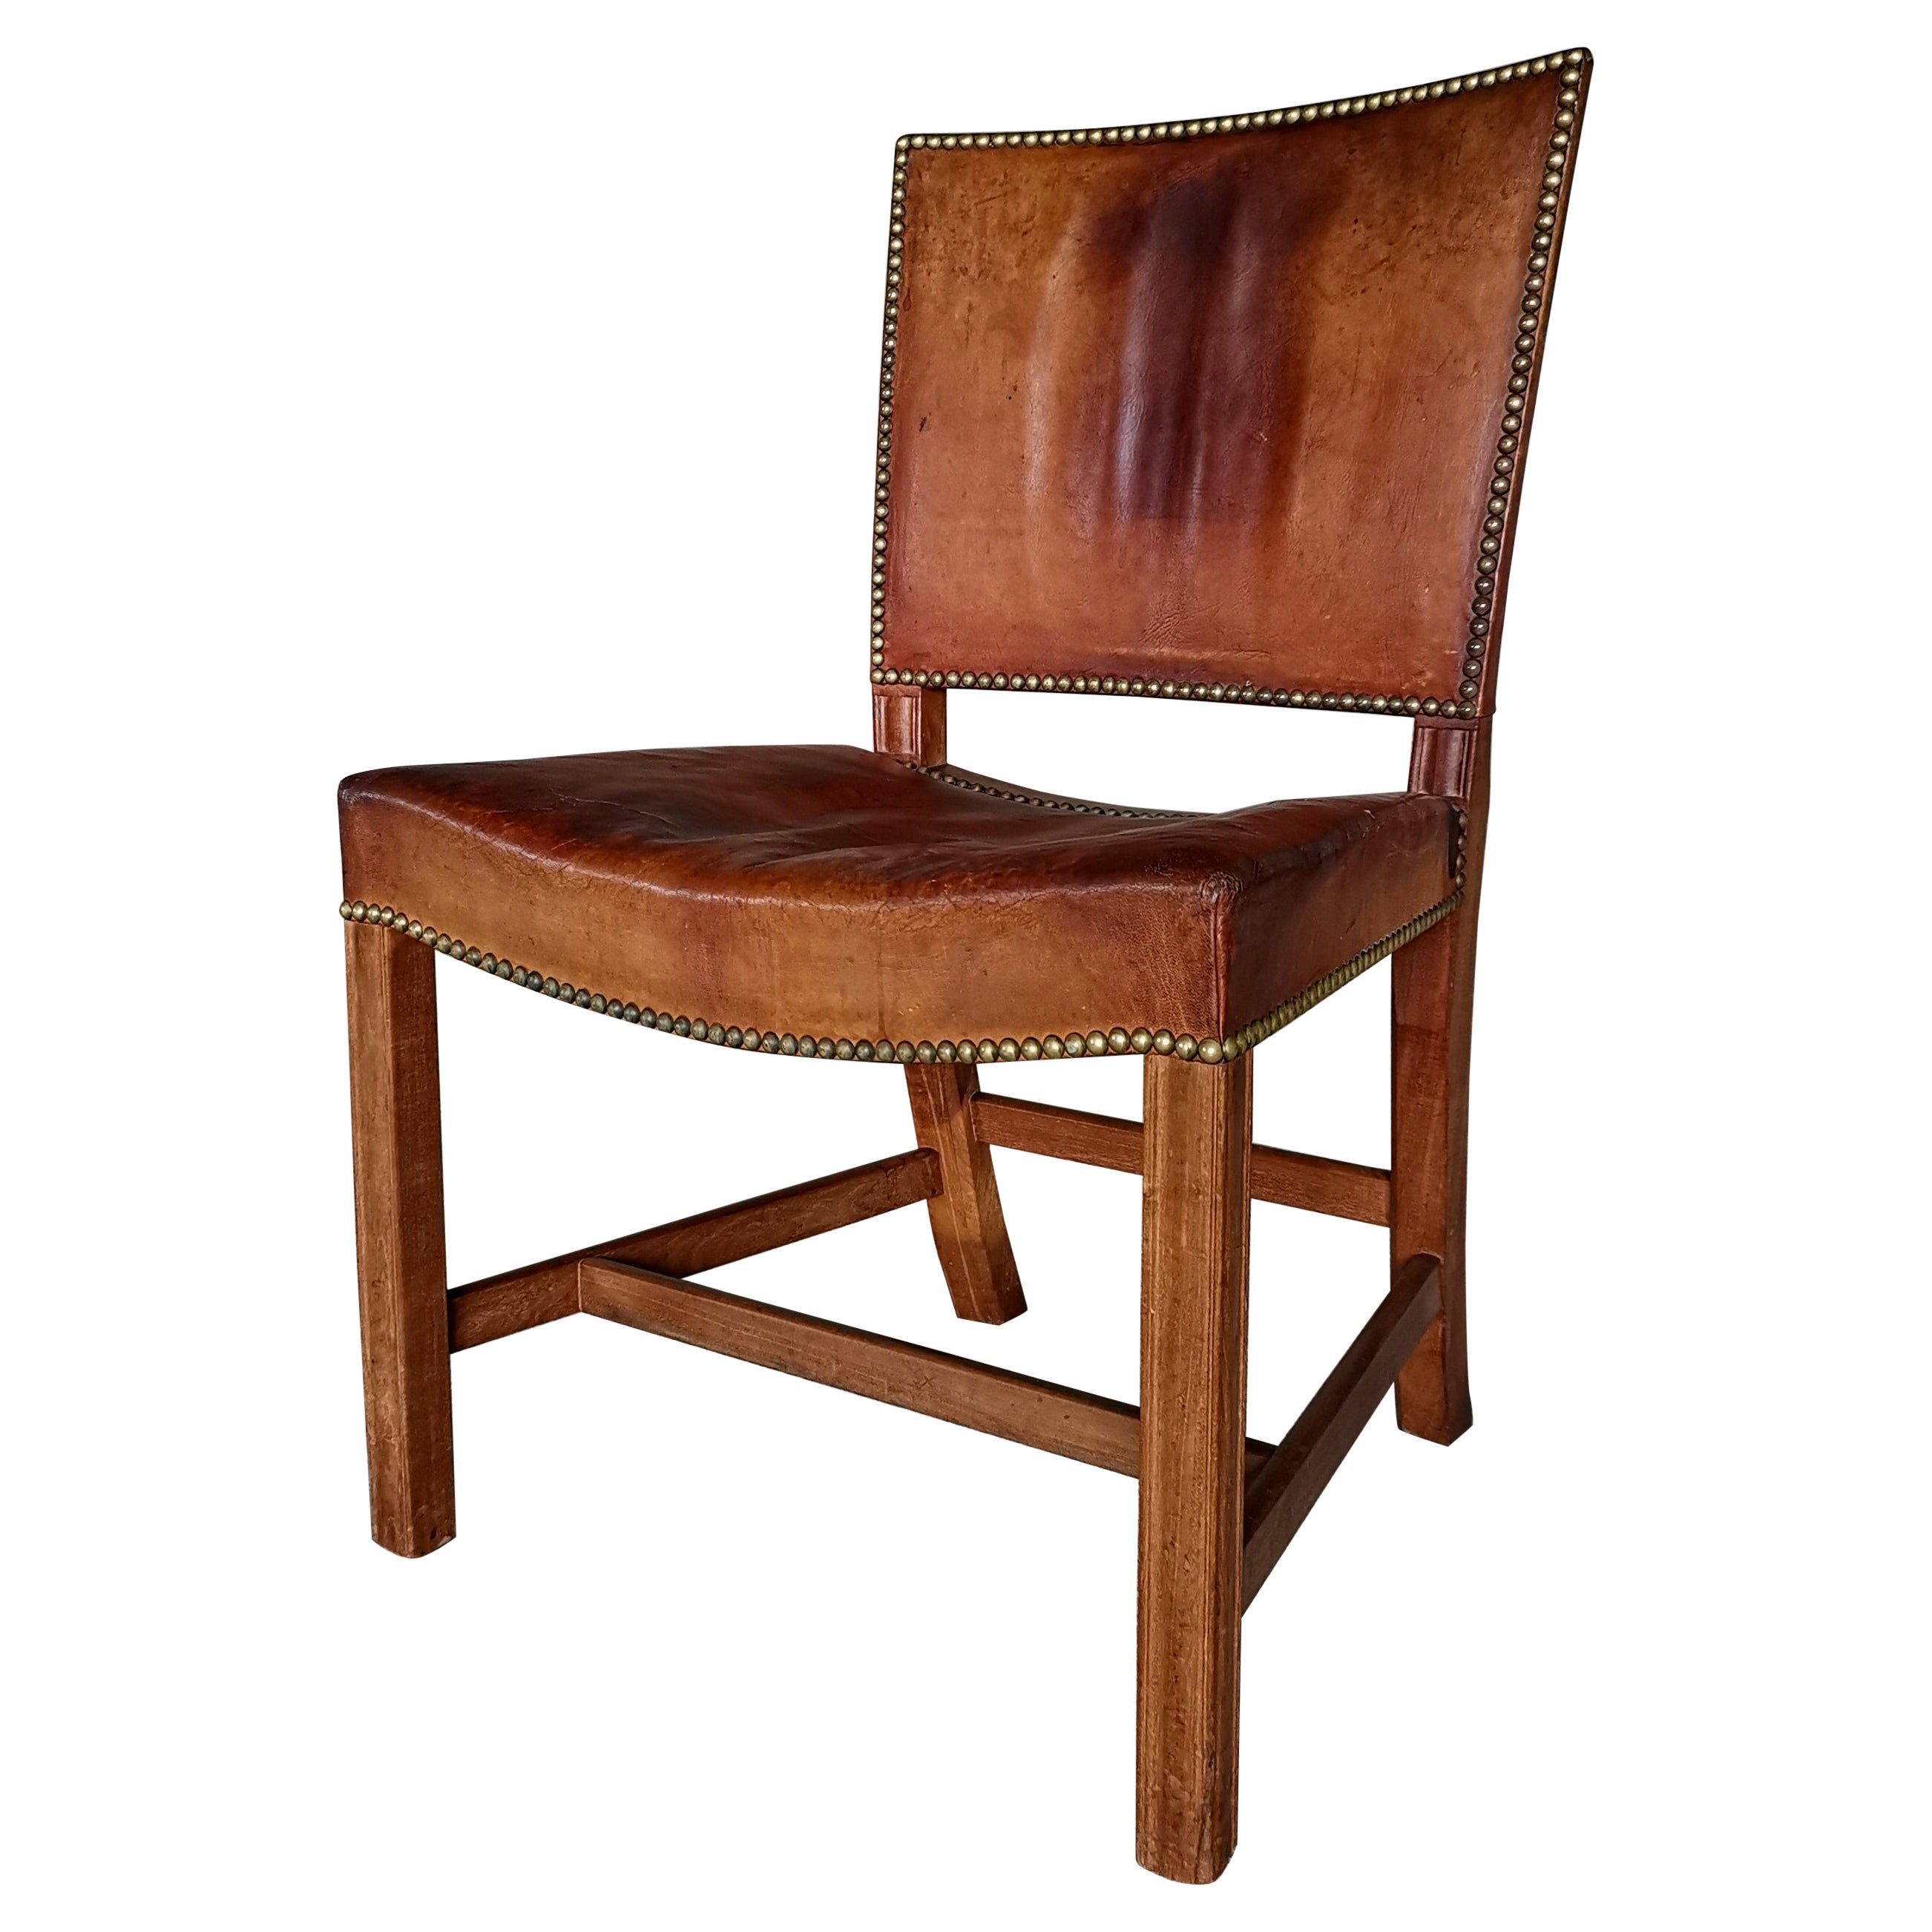 Danish early Model 3758 "The Red Chair" by Kaare Klint for Rud. Rasmussen 1920s